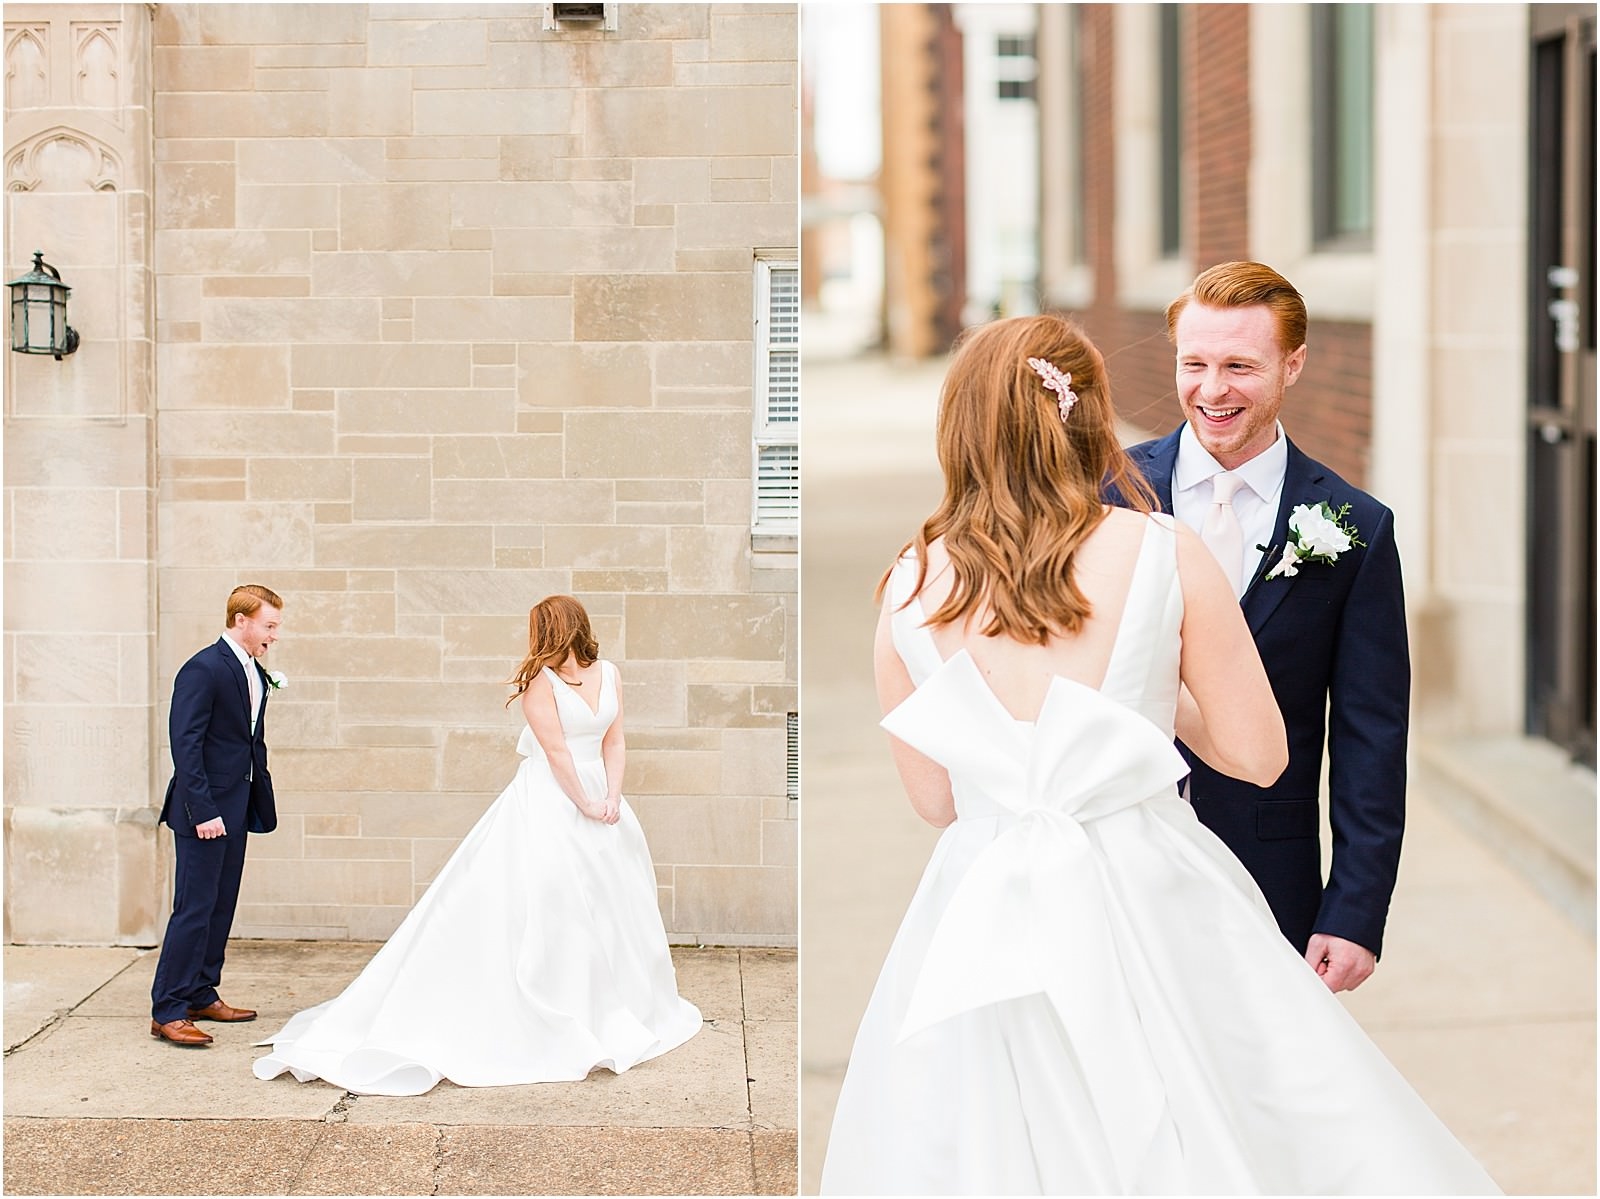 A Perfectly Intimate Wedding in Downtown Evansville Indiana | Jennah and Steve | Bret and Brandie Photography | | 0045.jpg